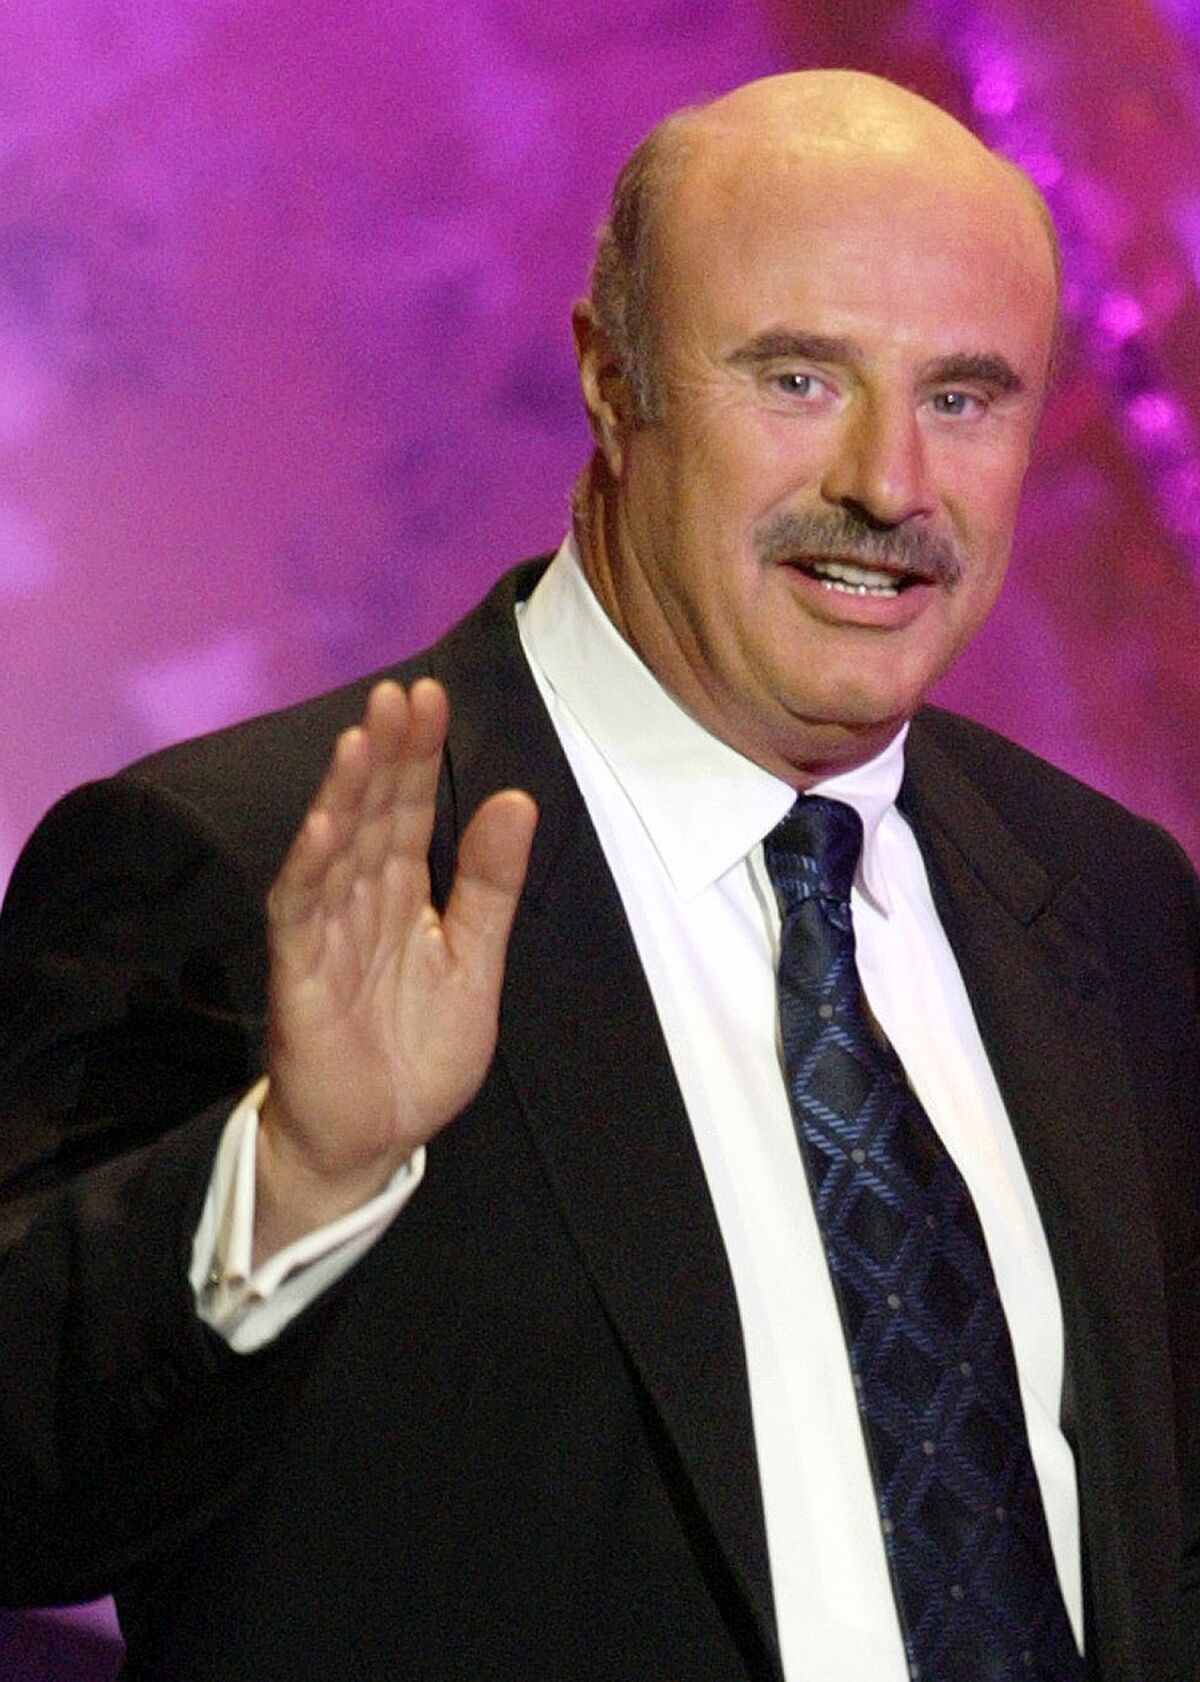 A bald man with a mustache waves with his right hand